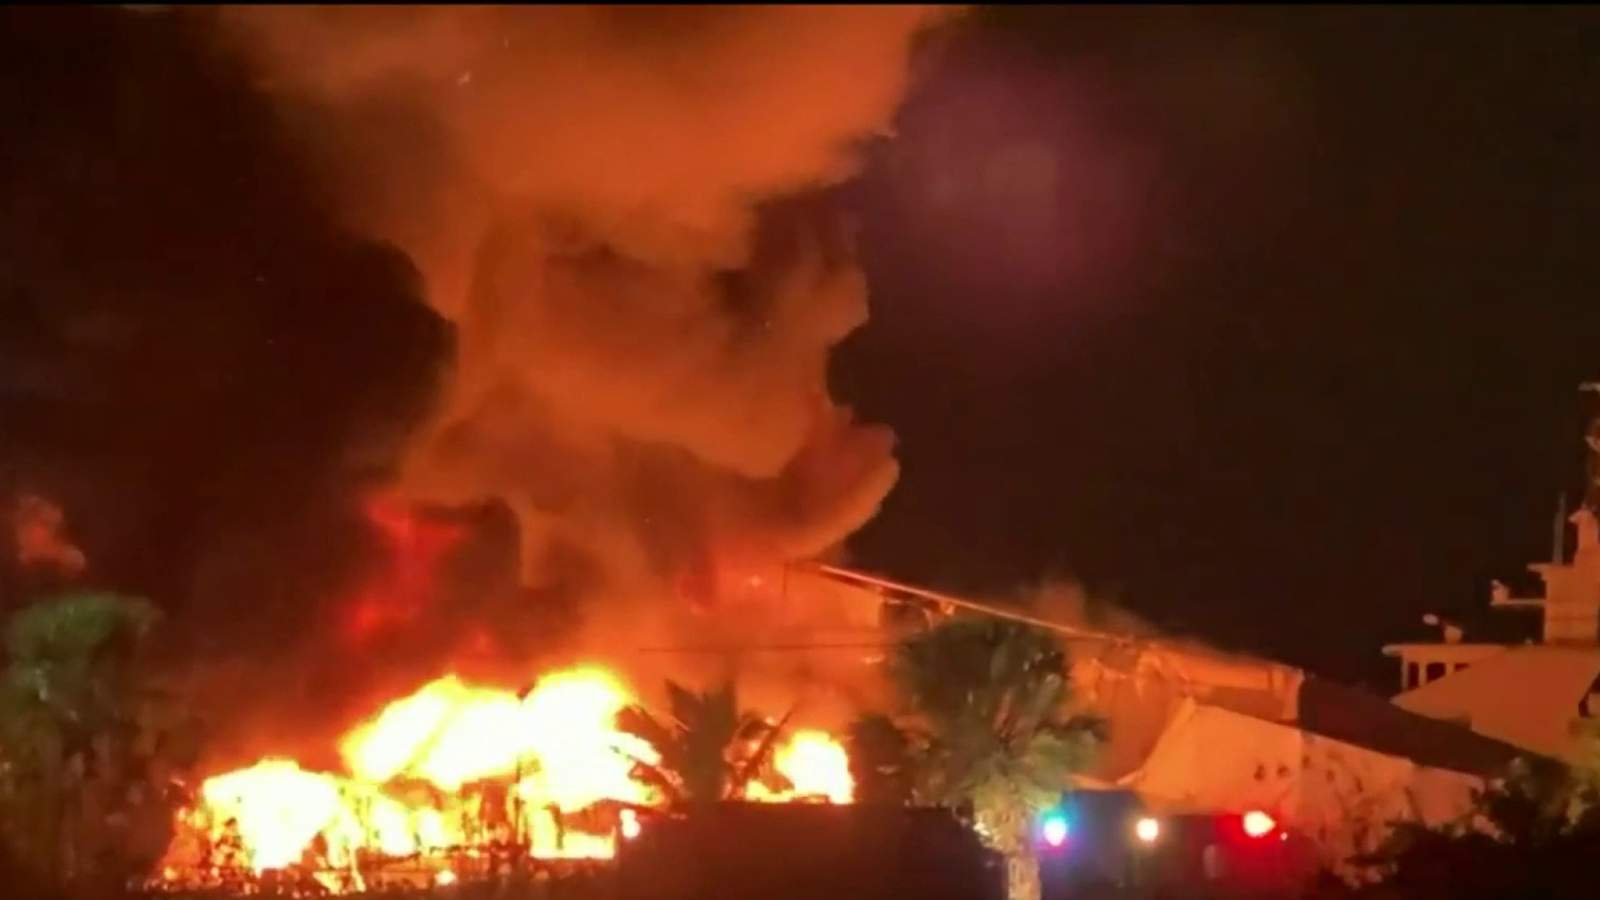 Fire destroys $20 million yachts in Florida